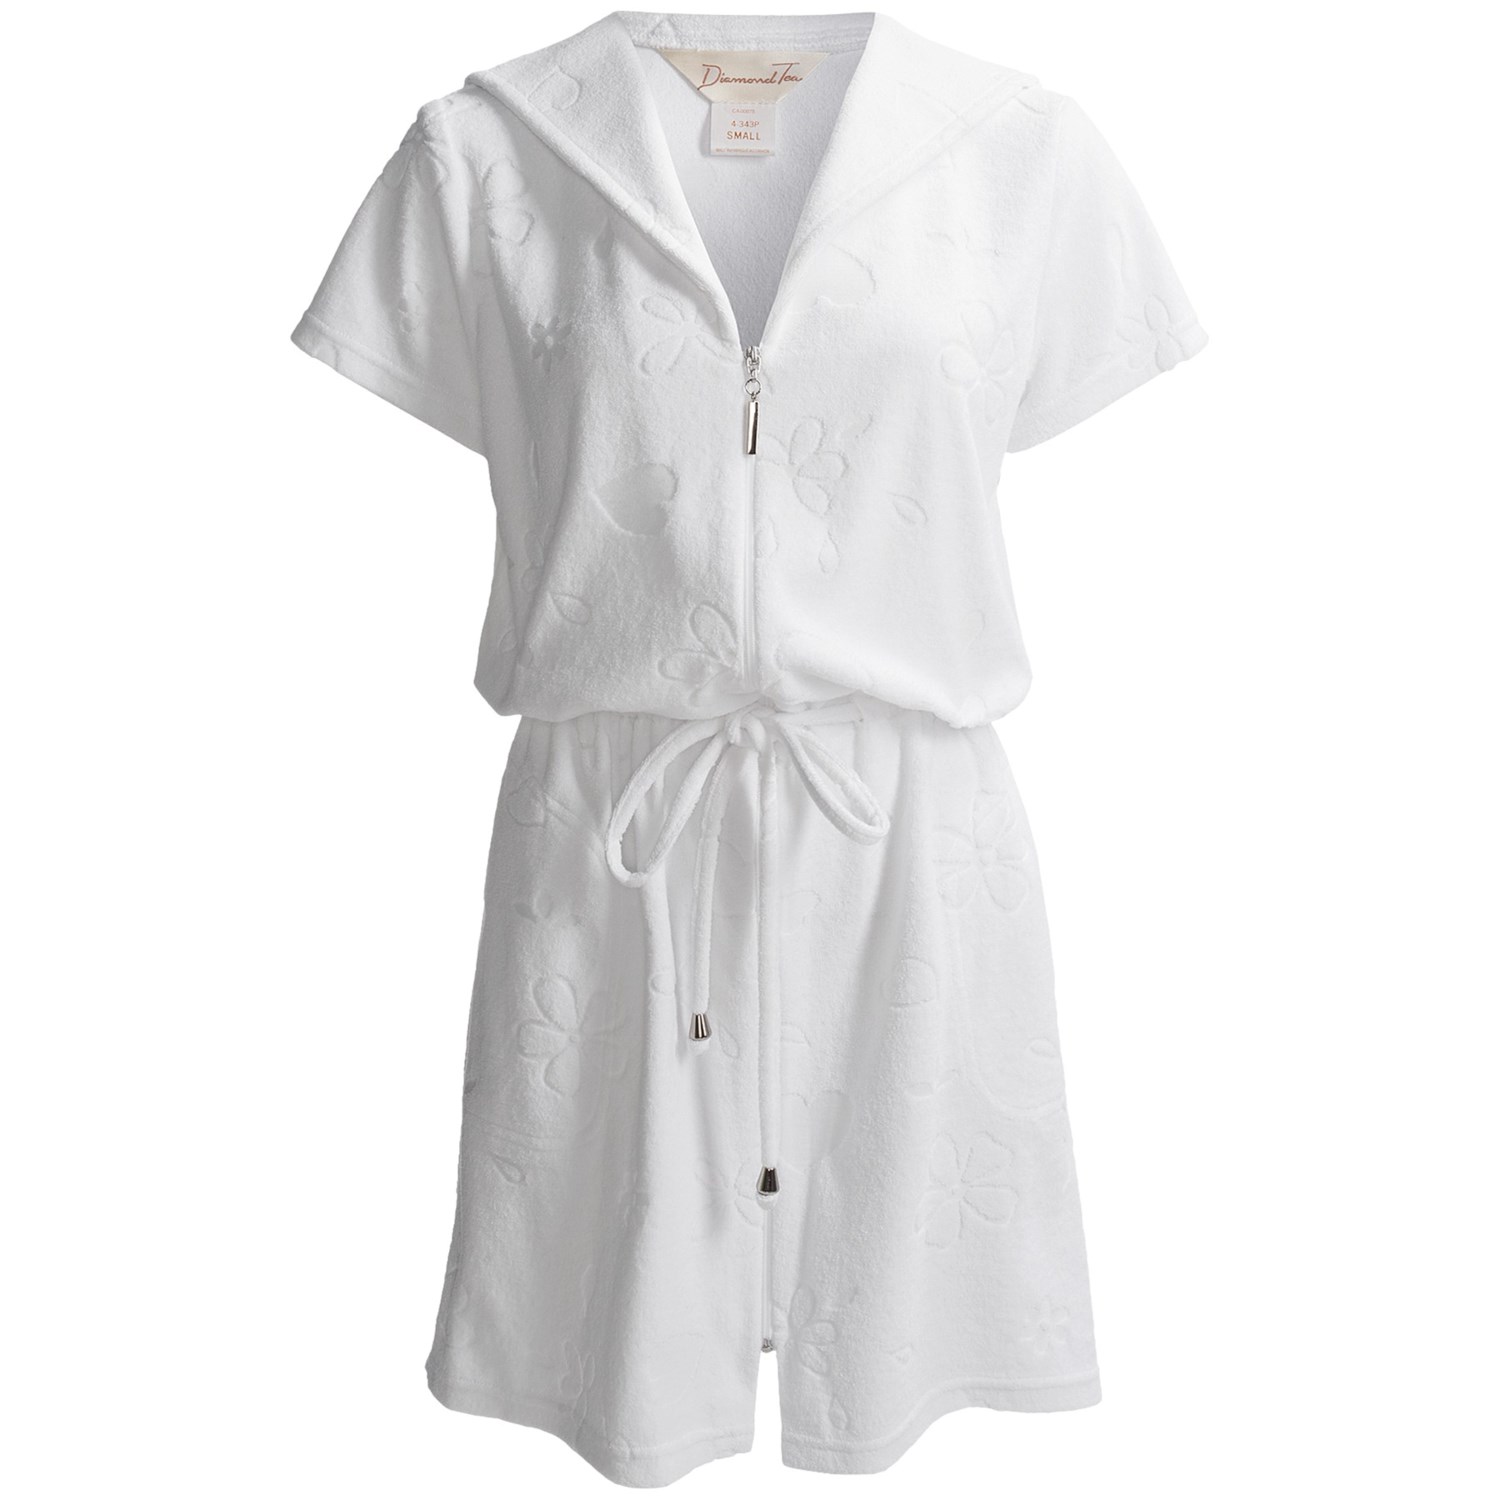 Diamond Tea Short Terry Cover-Up Robe (For Women) 7290G - Save 51%